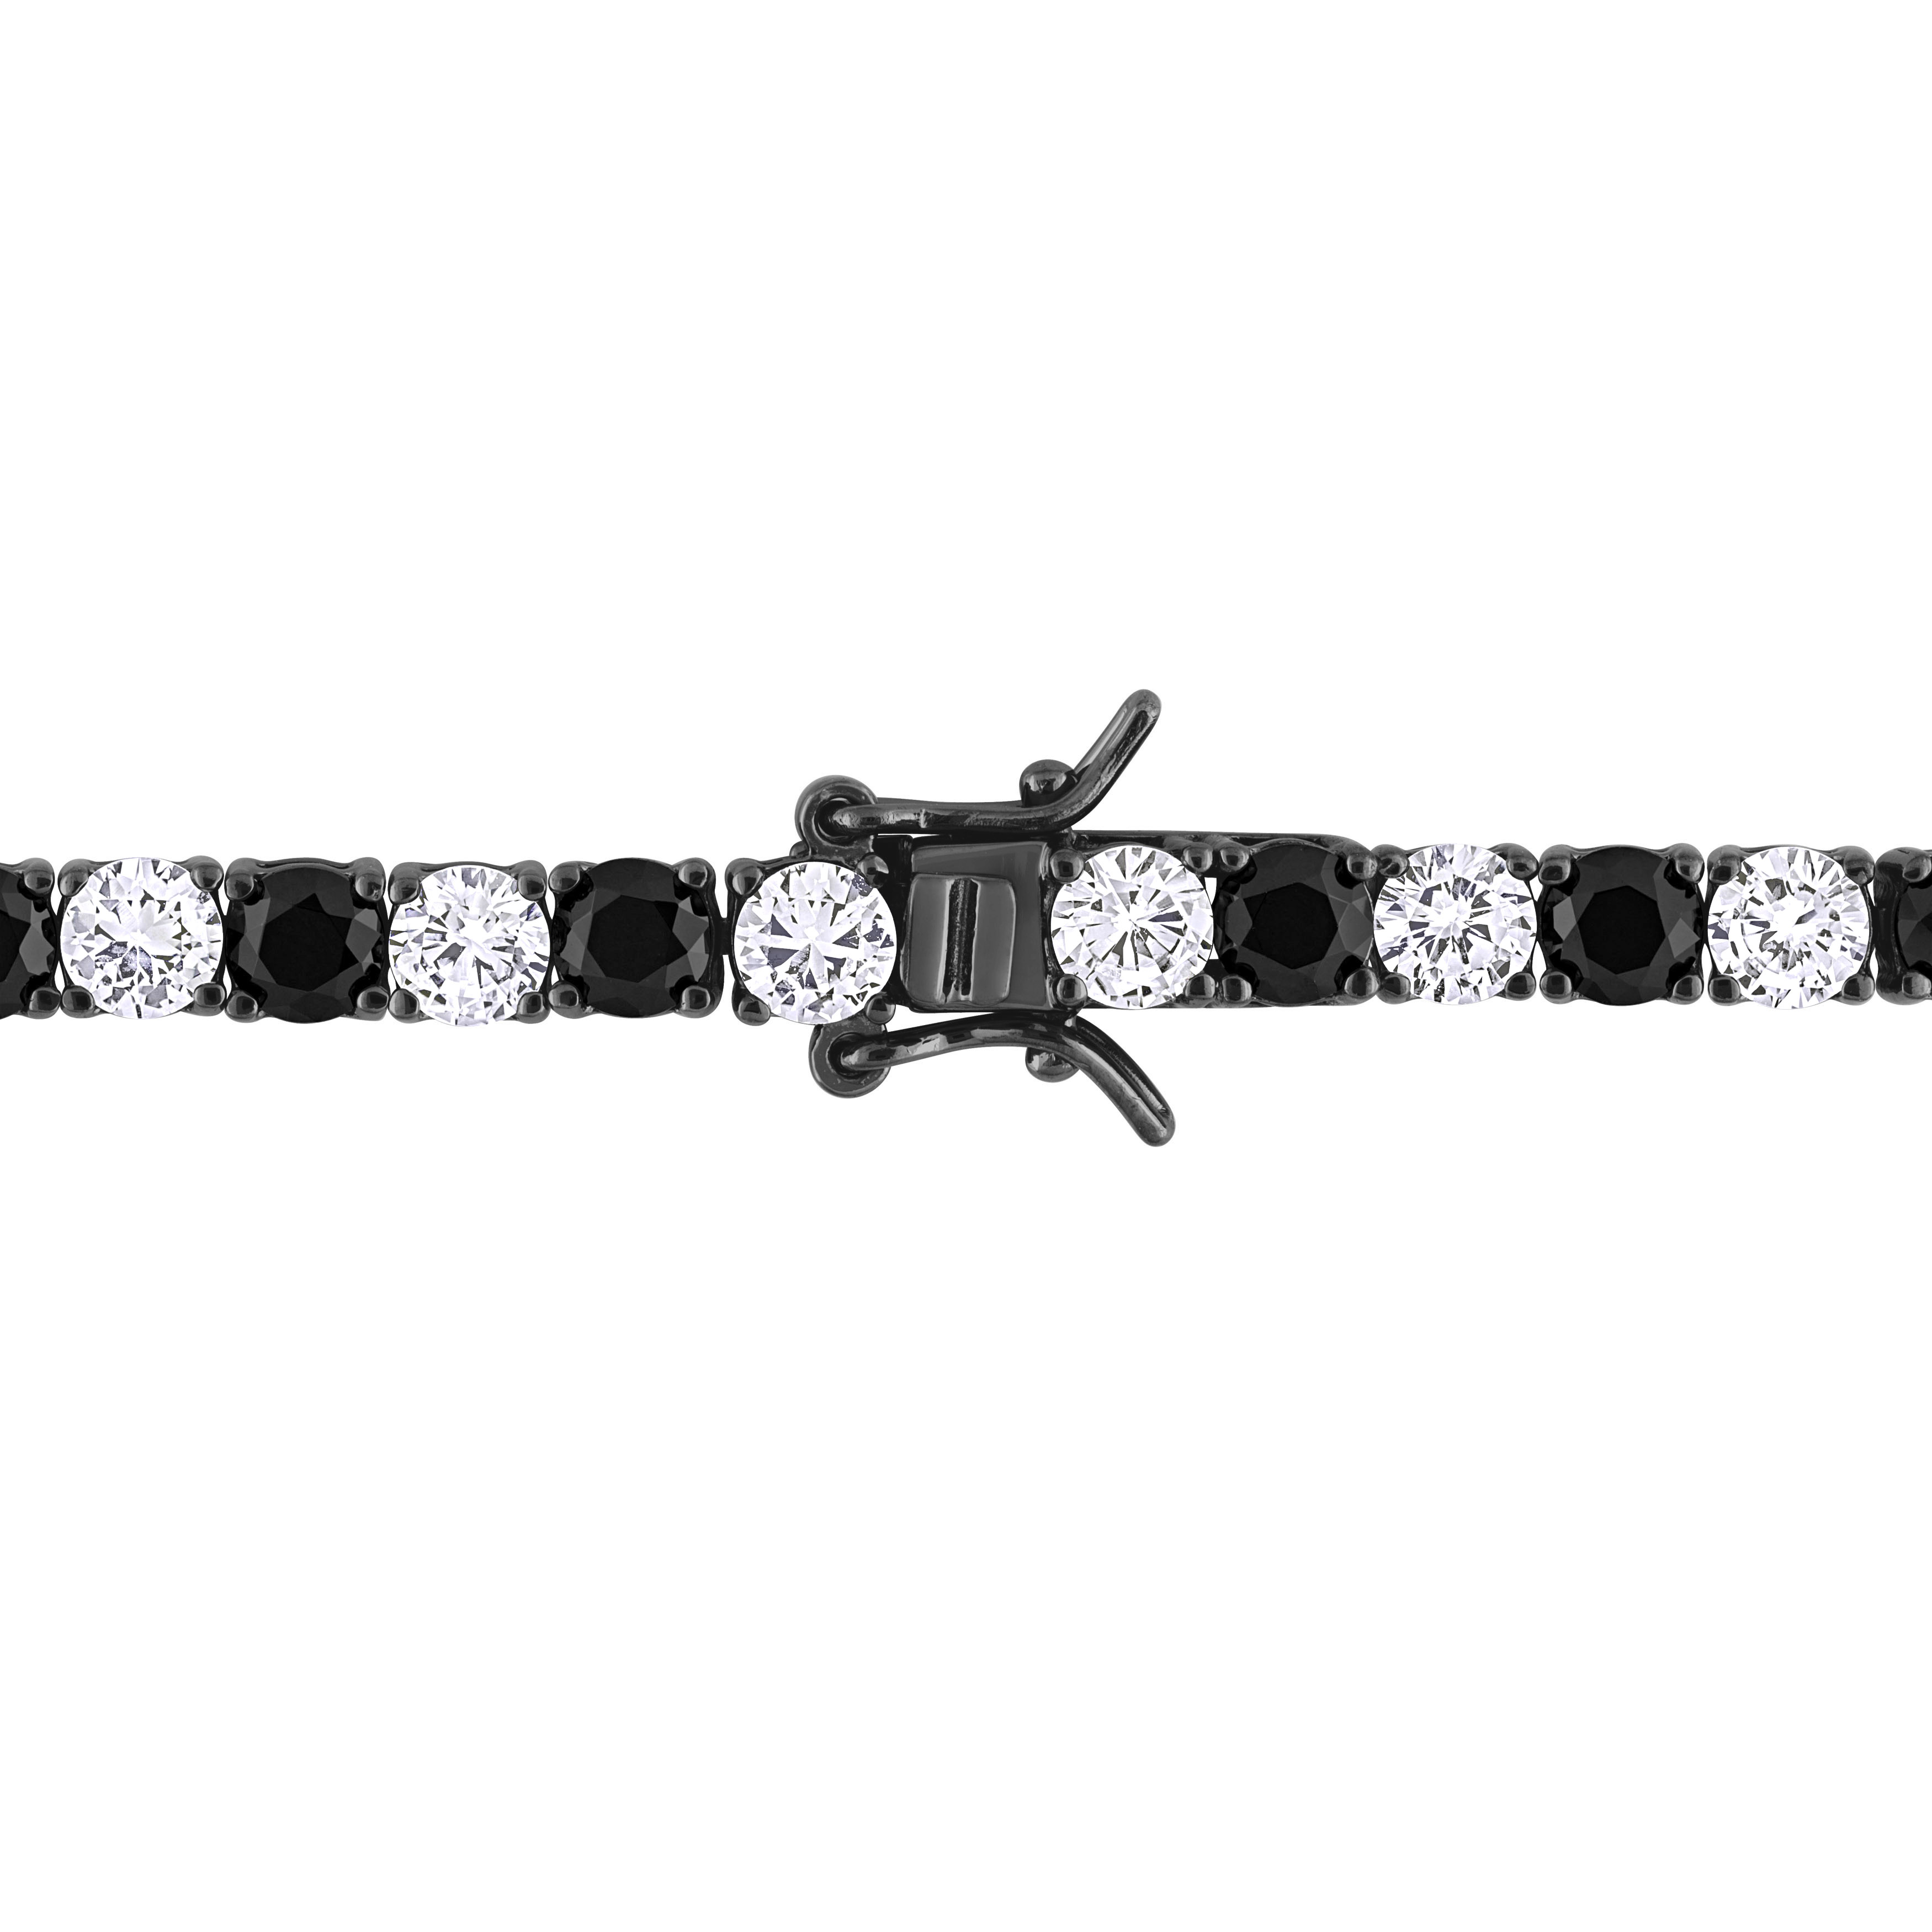 17 CT TGW Created White and Black Sapphire Men's Tennis Bracelet in Black Rhodium Plated Sterling Silver - 9 in.